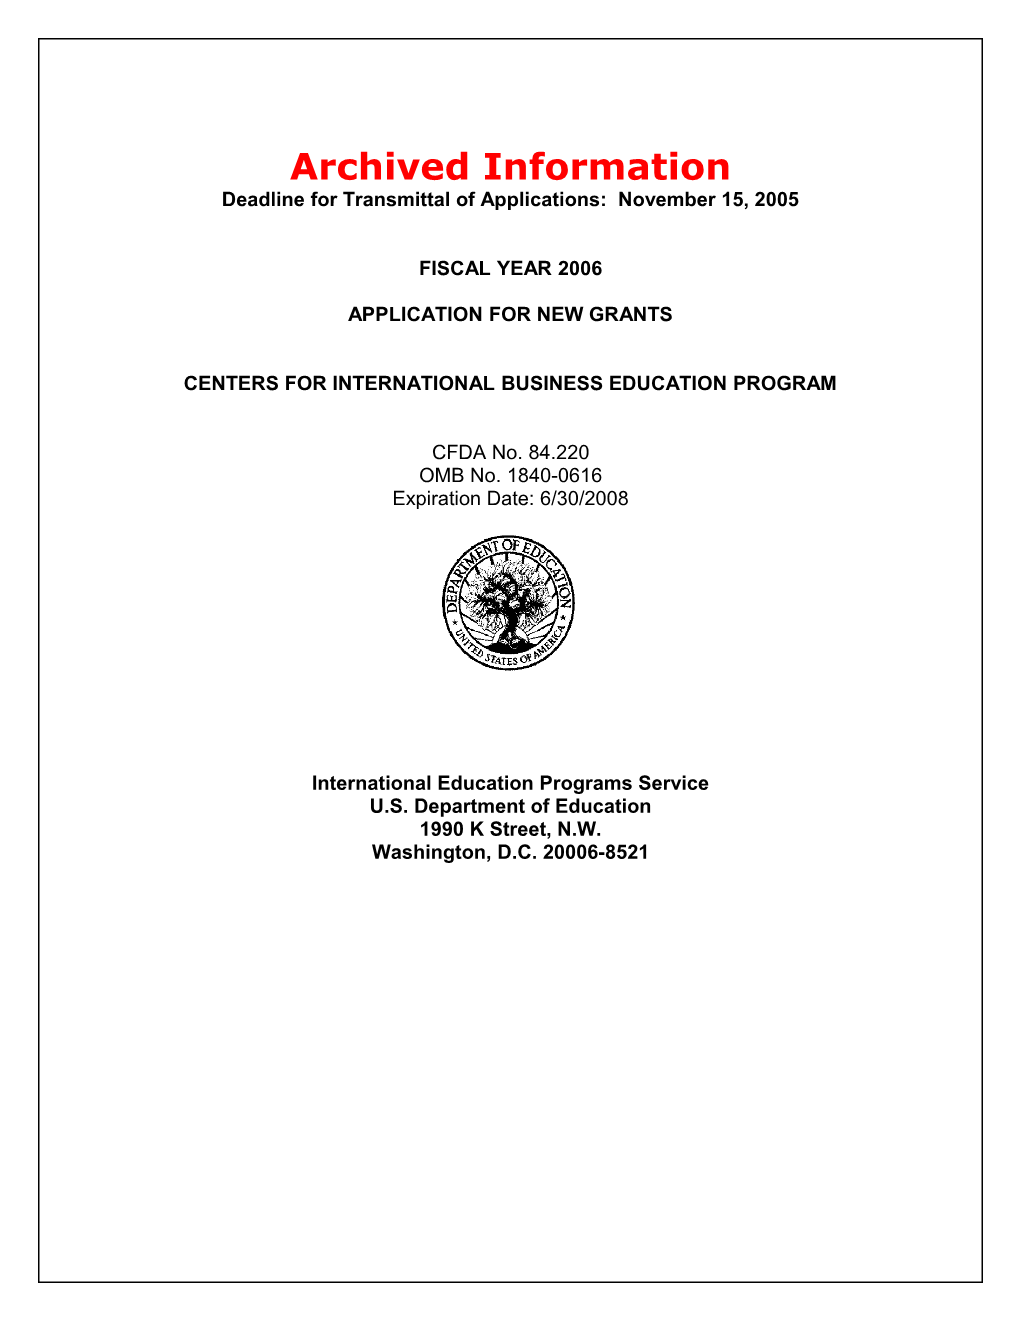 Archived: FY06 Application for the Centers for International Business Education Program